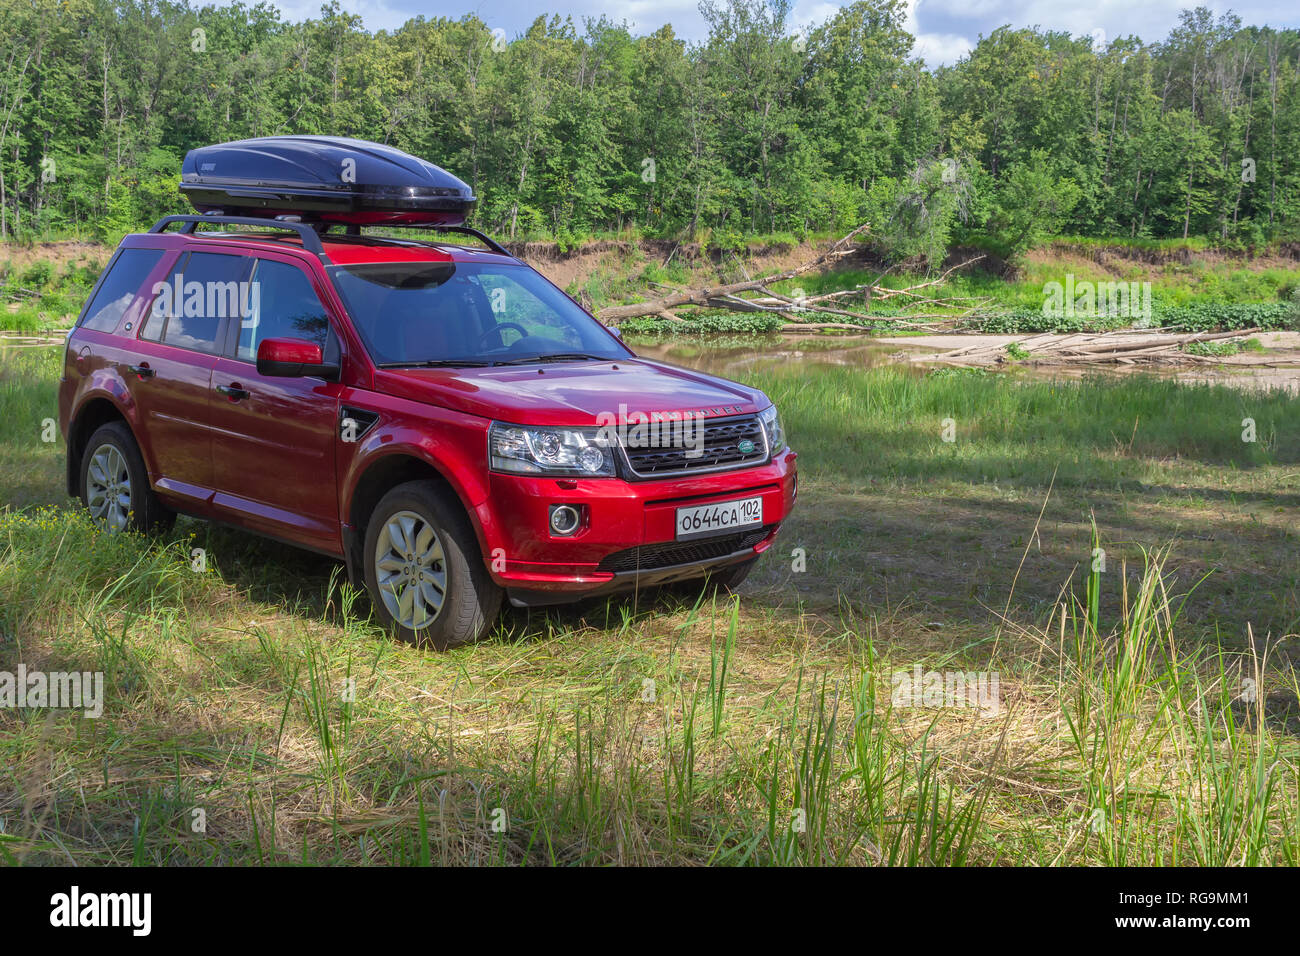 SUV LAND ROVER FREELANDER 2 and TULE autoboxing in the woods on the river bank, a car for traveling. Stock Photo